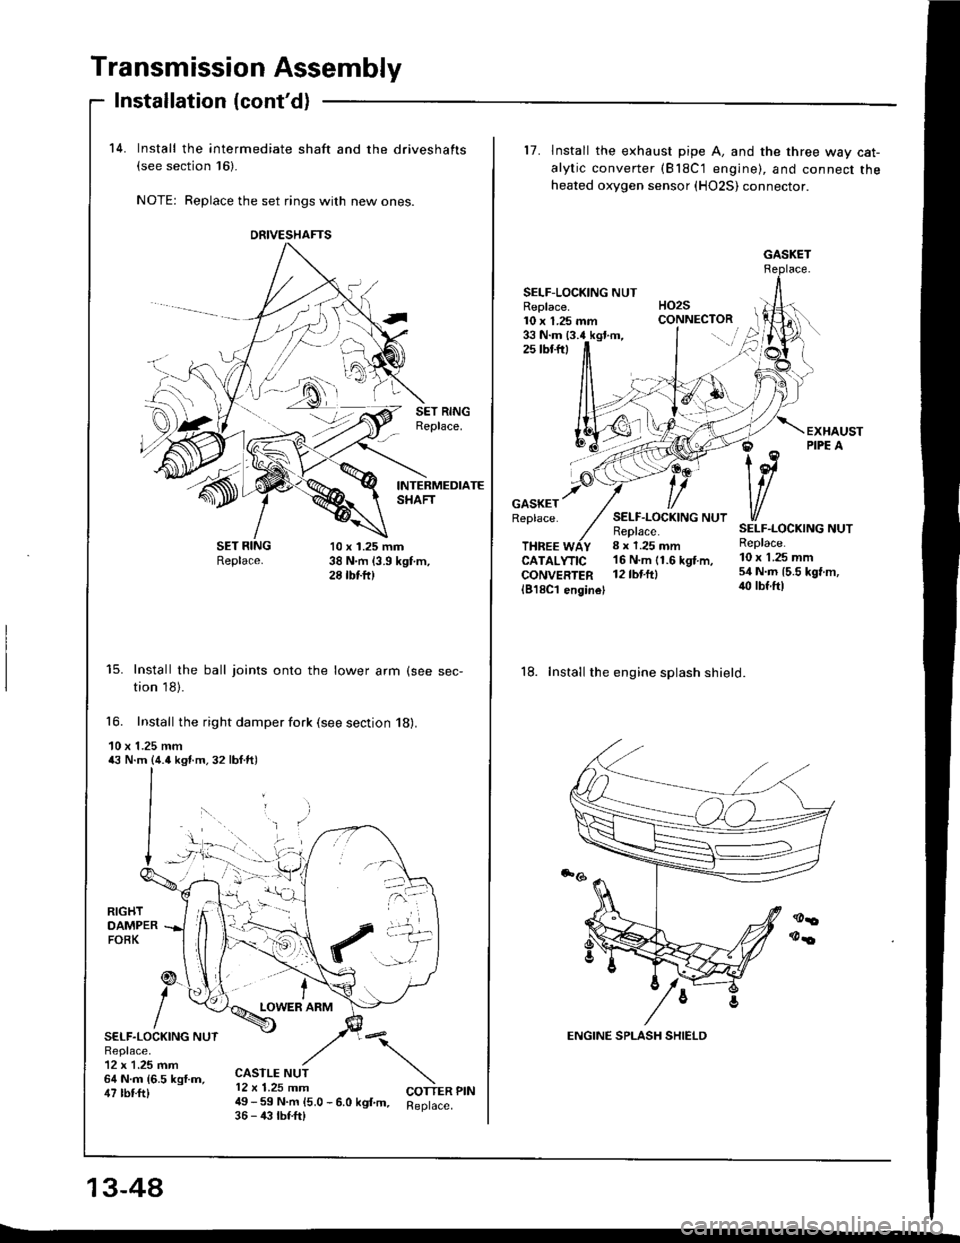 HONDA INTEGRA 1994 4.G Workshop Manual Transmission Assembly
14. Install the intermediate shaft and the driveshafts(see section 16)-
NOTE: Replace the set rings with new ones.
Installation (contd)
-Sl
SET RINGReplace.
INTERMEDIATESHAFT
Re